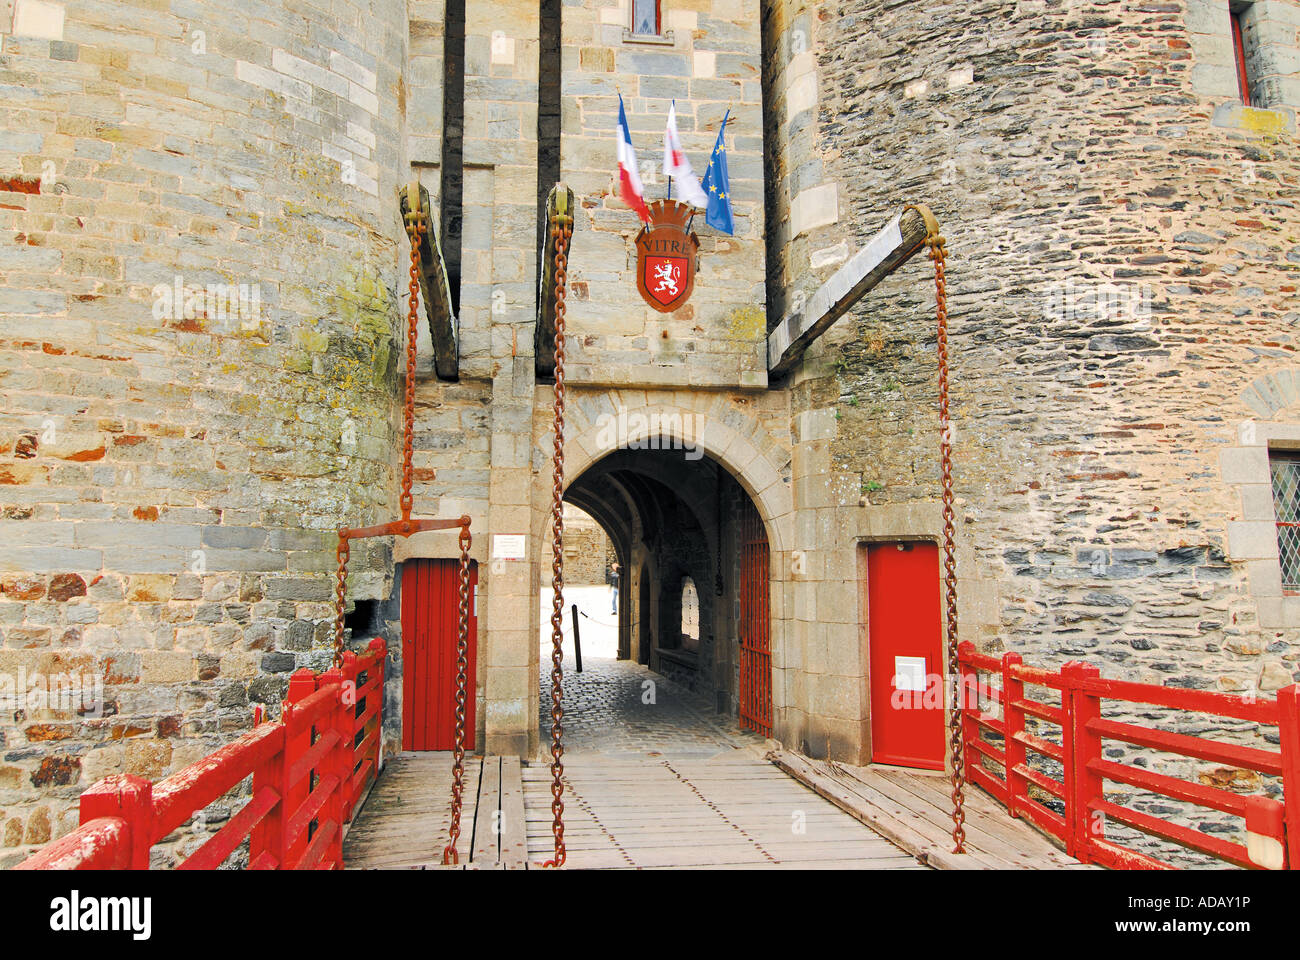 Entrance of the medieval castle of Vitré, Brittany, France Stock Photo